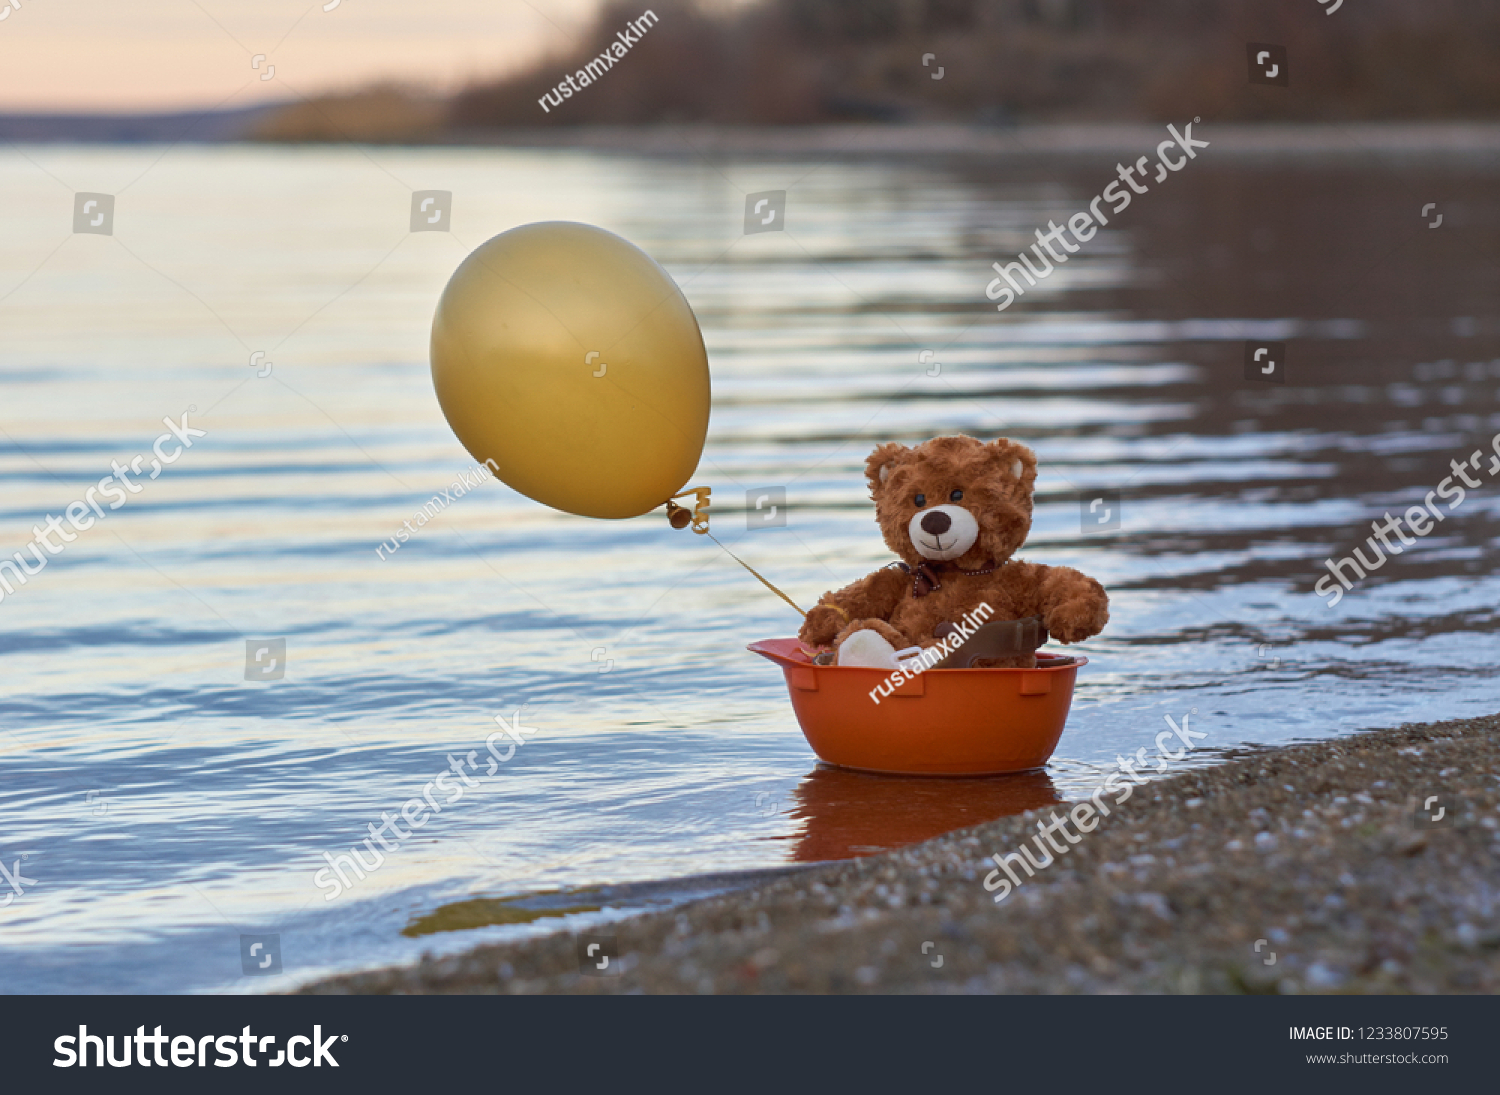 floating teddy bear with balloons